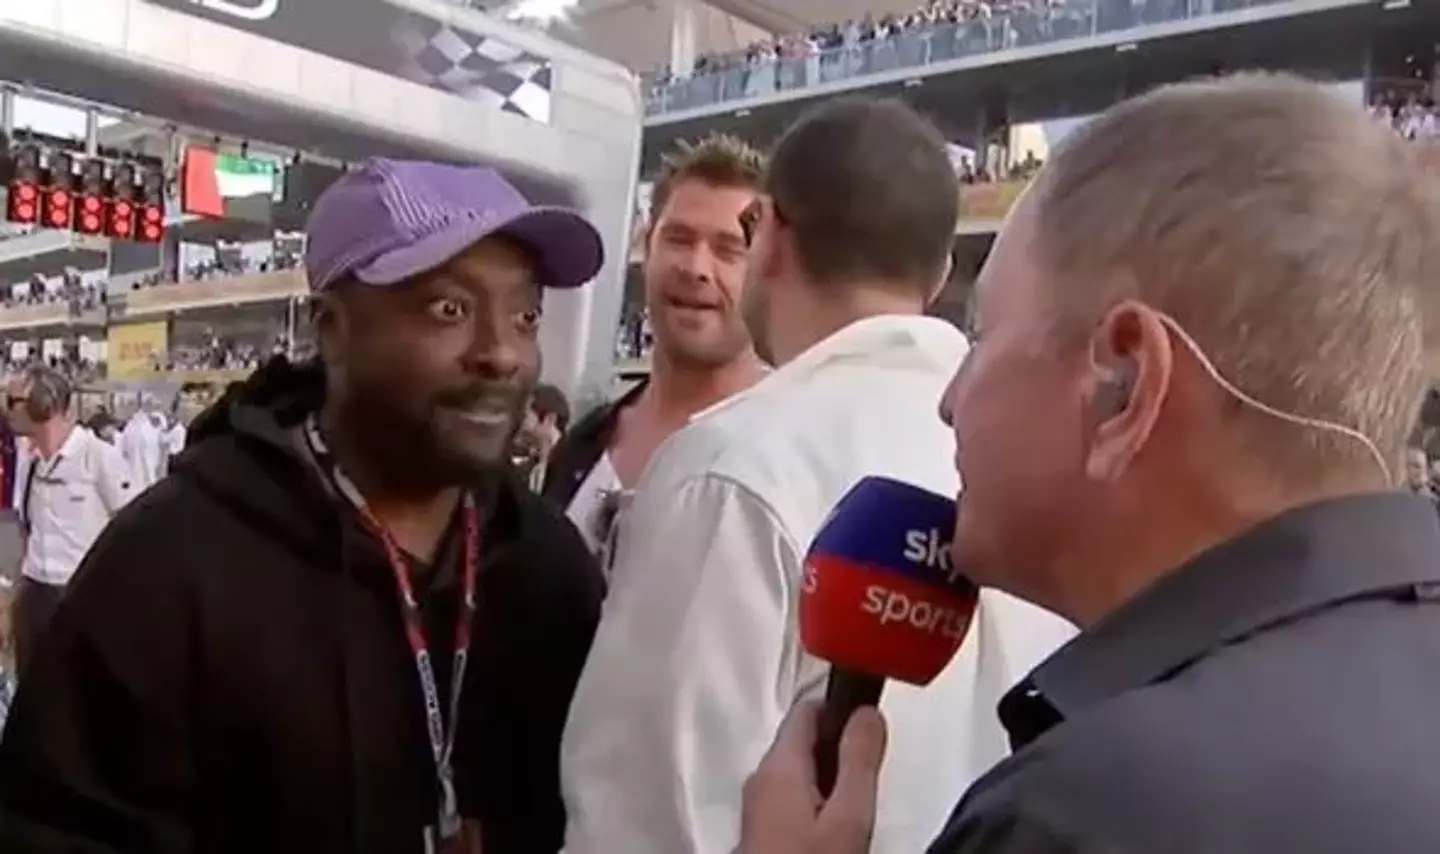 The Sky Sports F1 broadcaster is known and loved for his awkward AF interactions with celebrities.